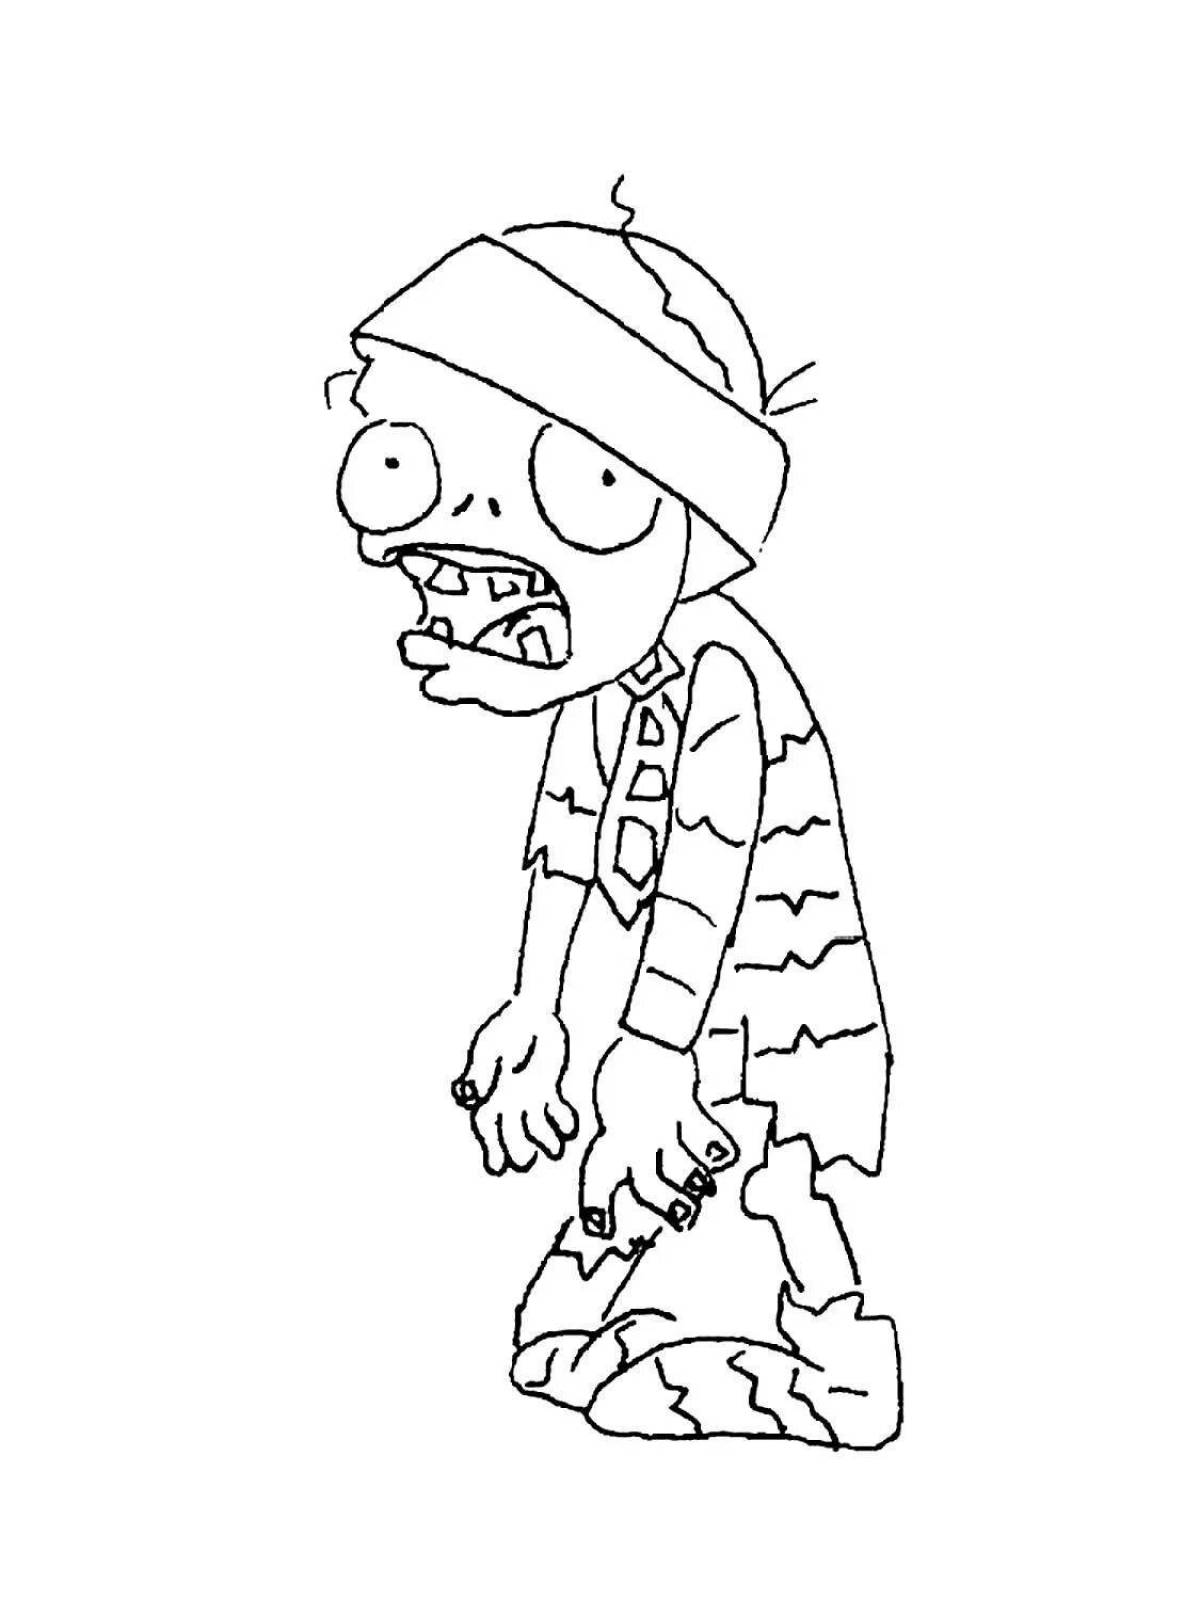 Nerving zombie coloring page for kids